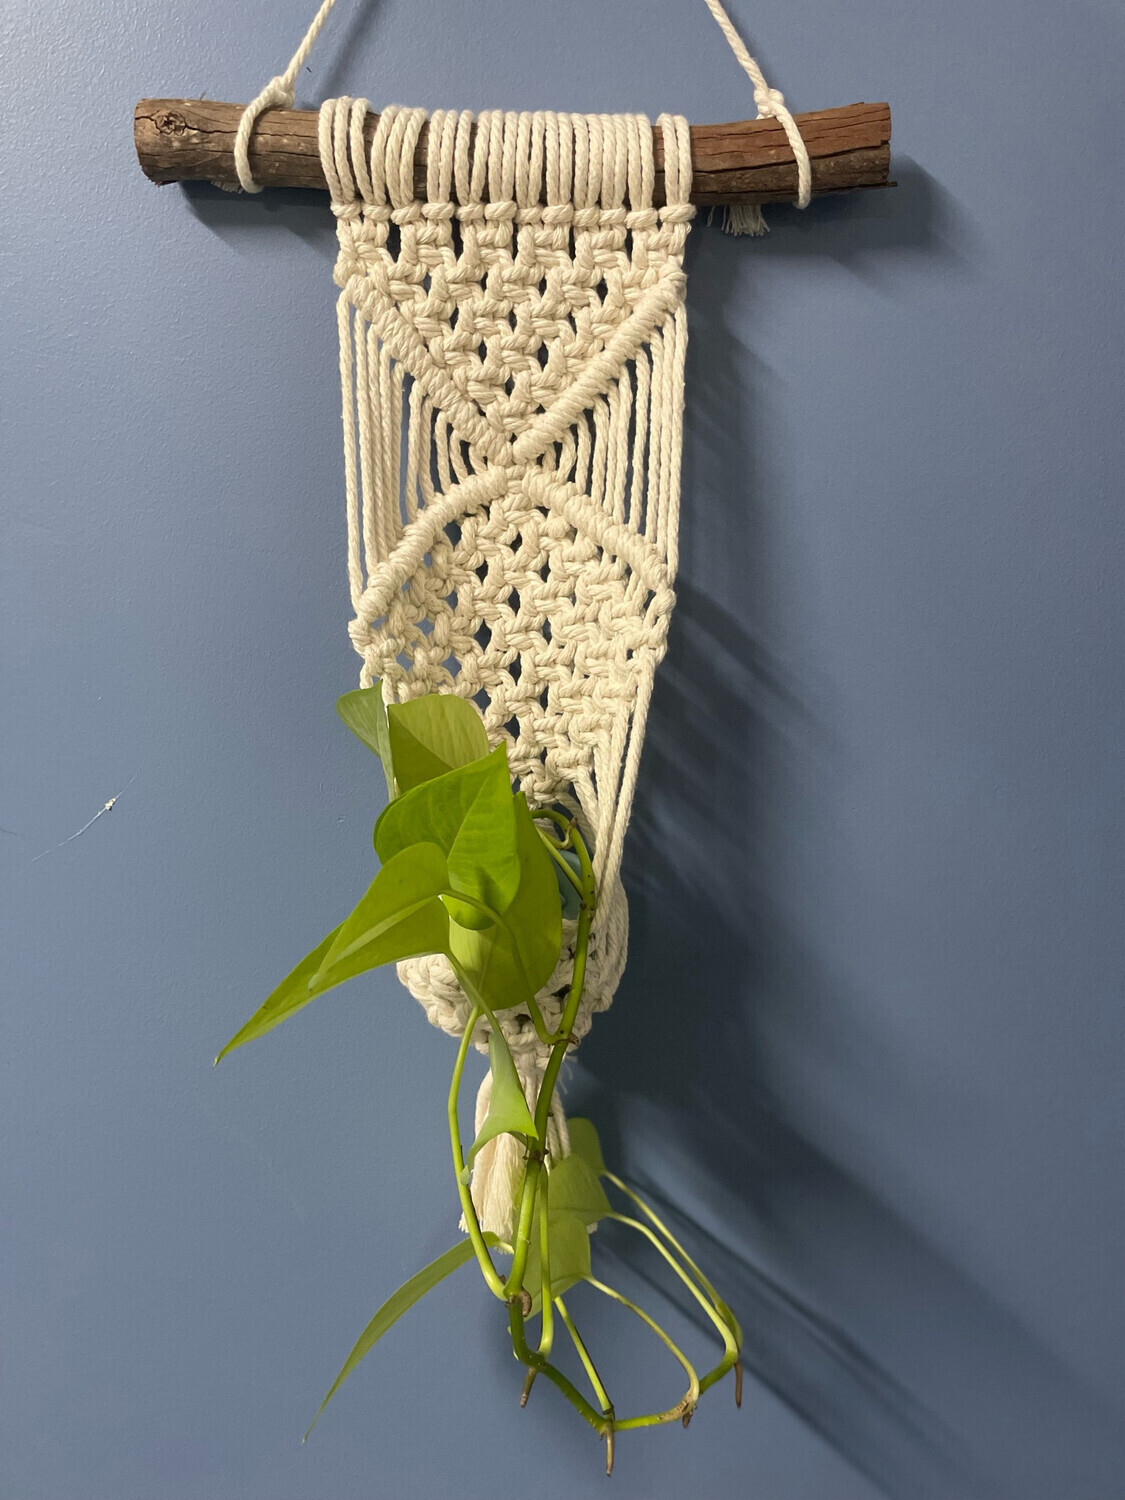 Macramé Wall Hanging Workshop - Wednesday 3rd August 12.30-2.30pm